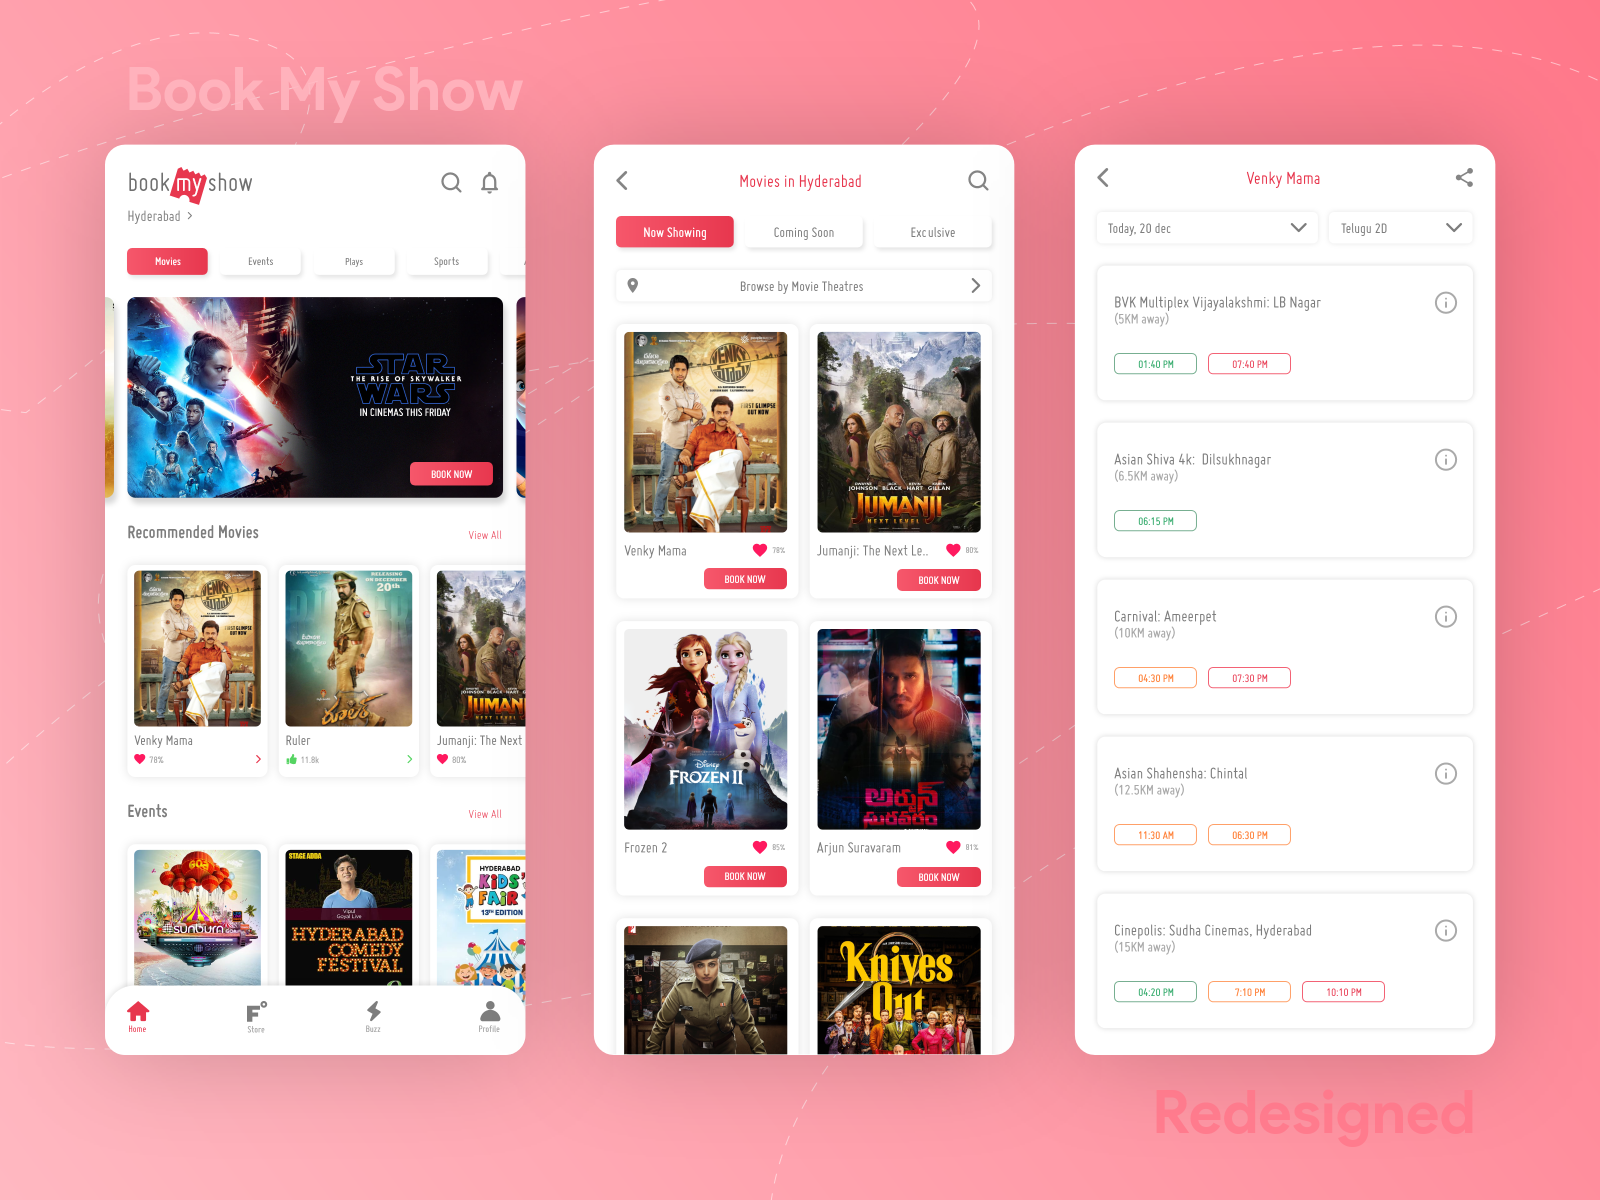 Book My Show Redesigned App Ui By Sri Ram Teja On Dribbble